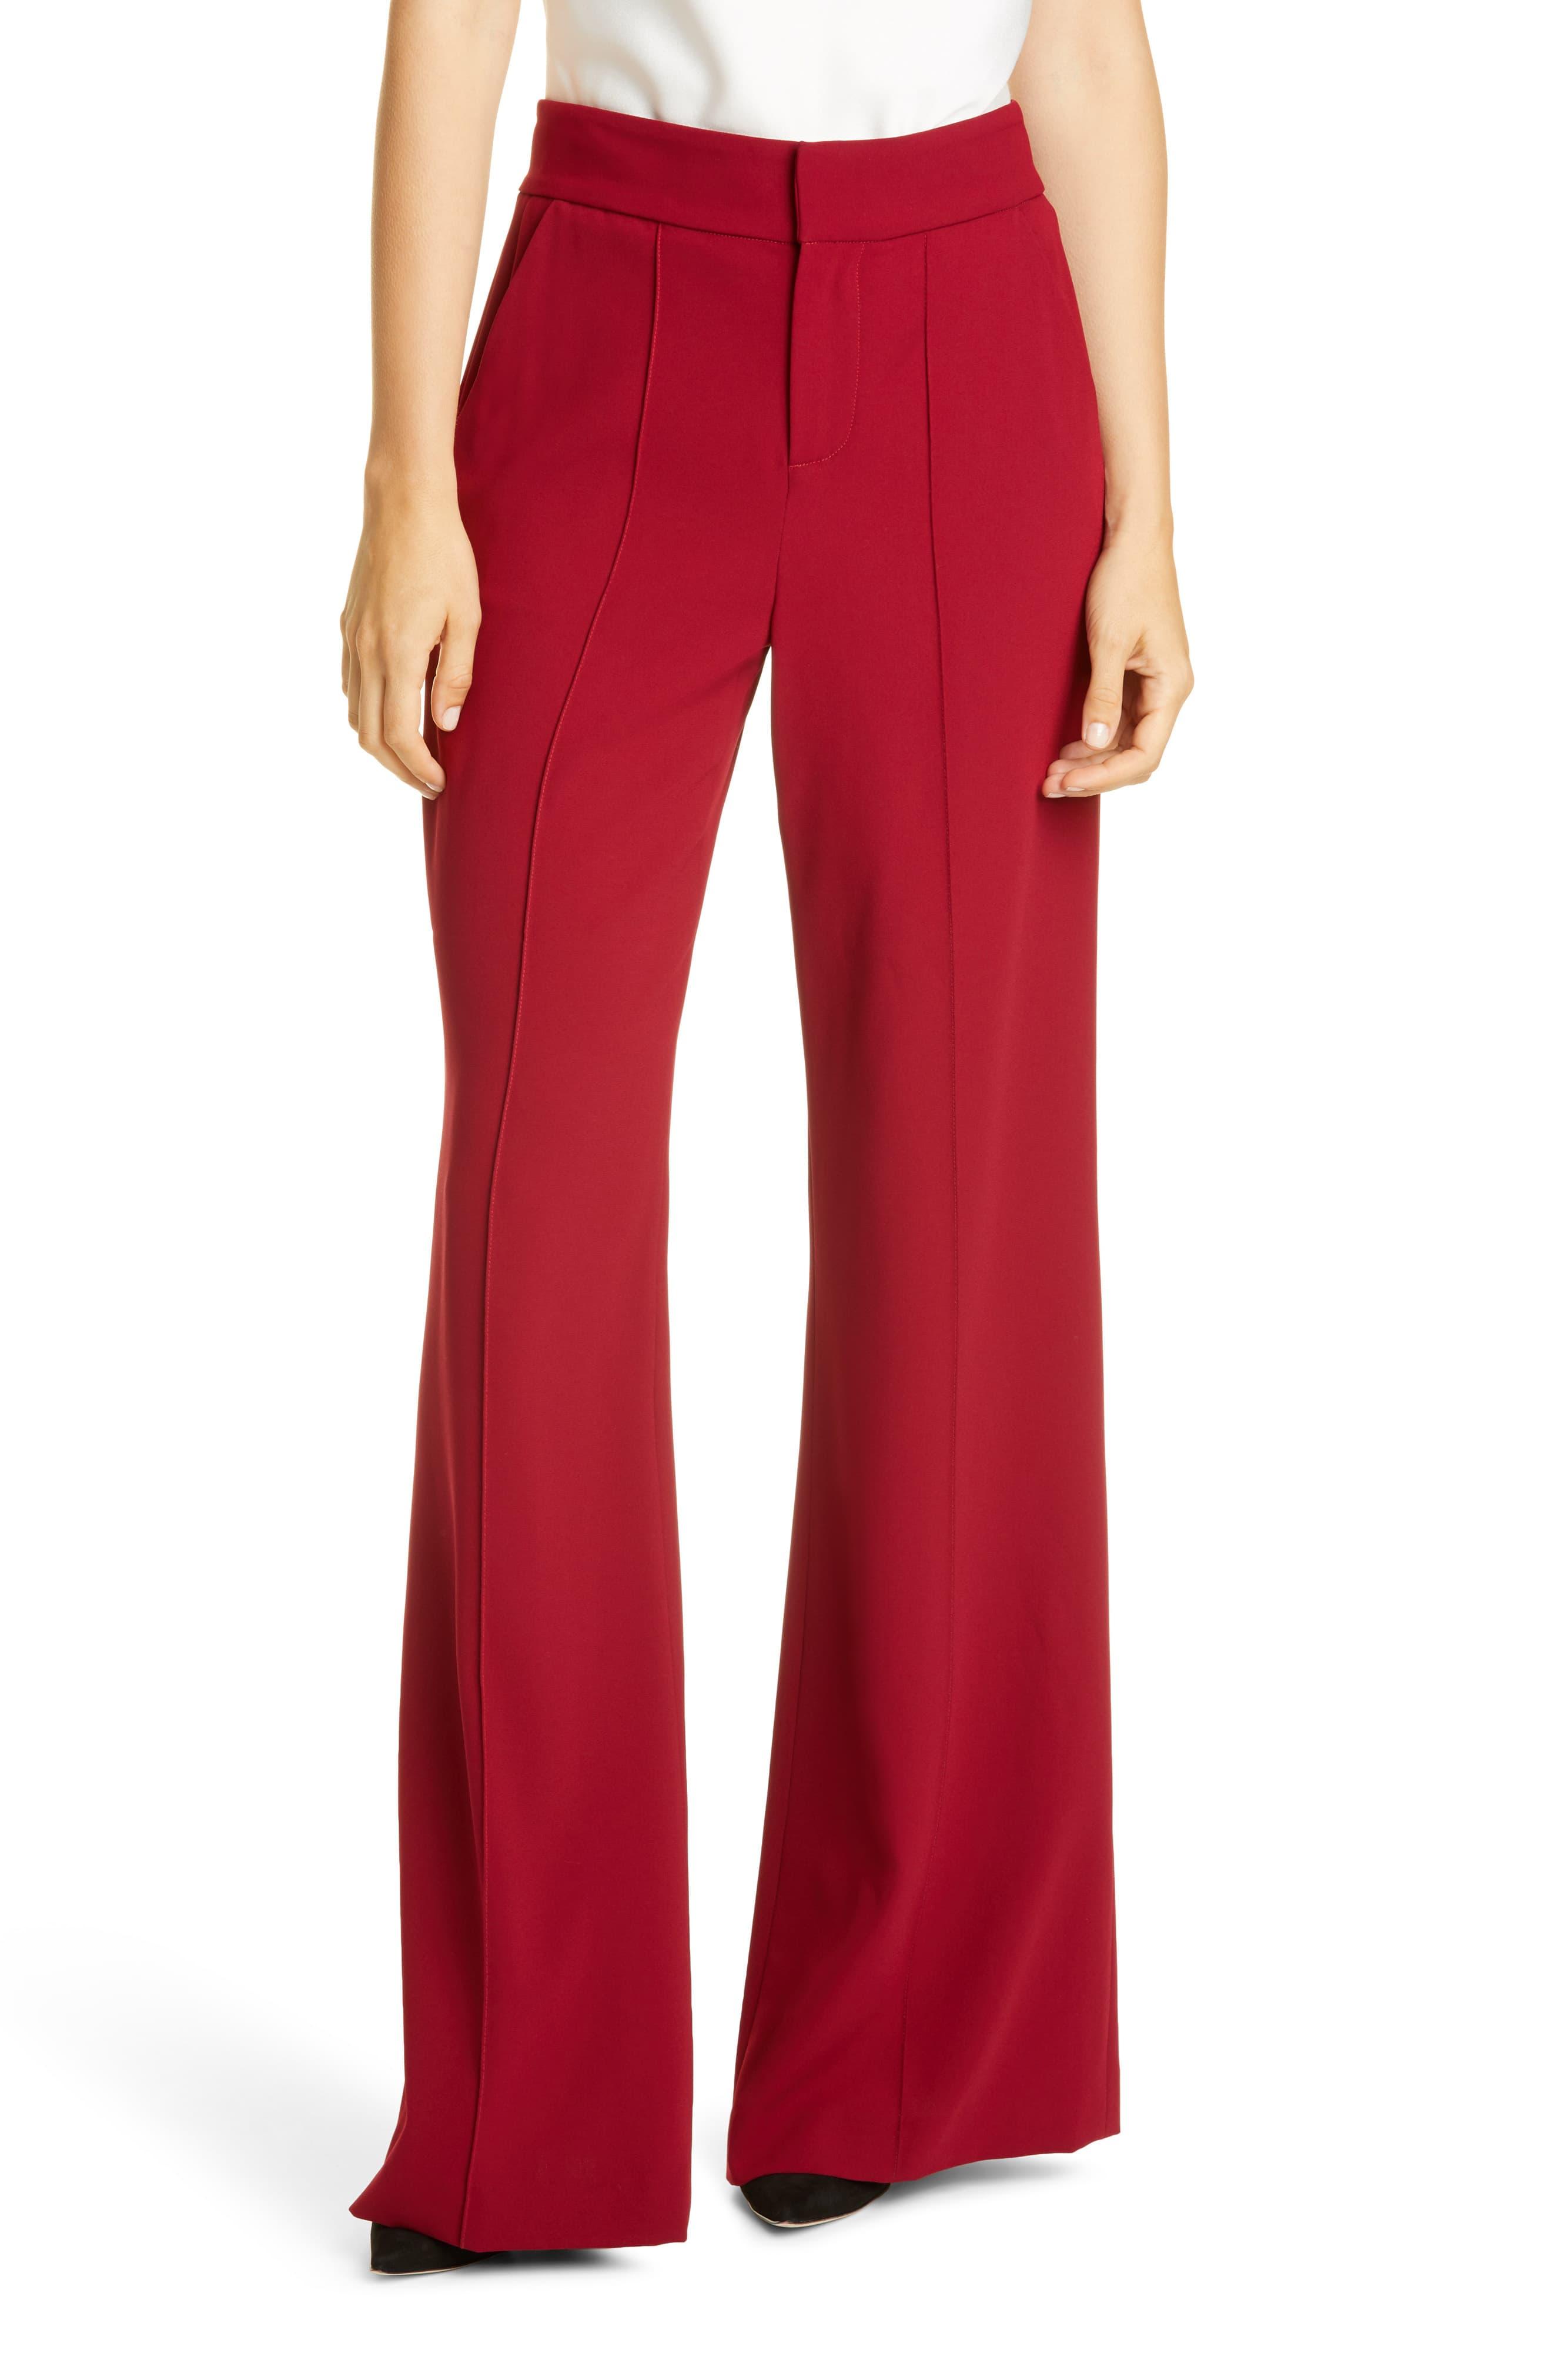 Alice + Olivia Dylan High Waist Wide Leg Pants in Bordeaux (Red) - Lyst